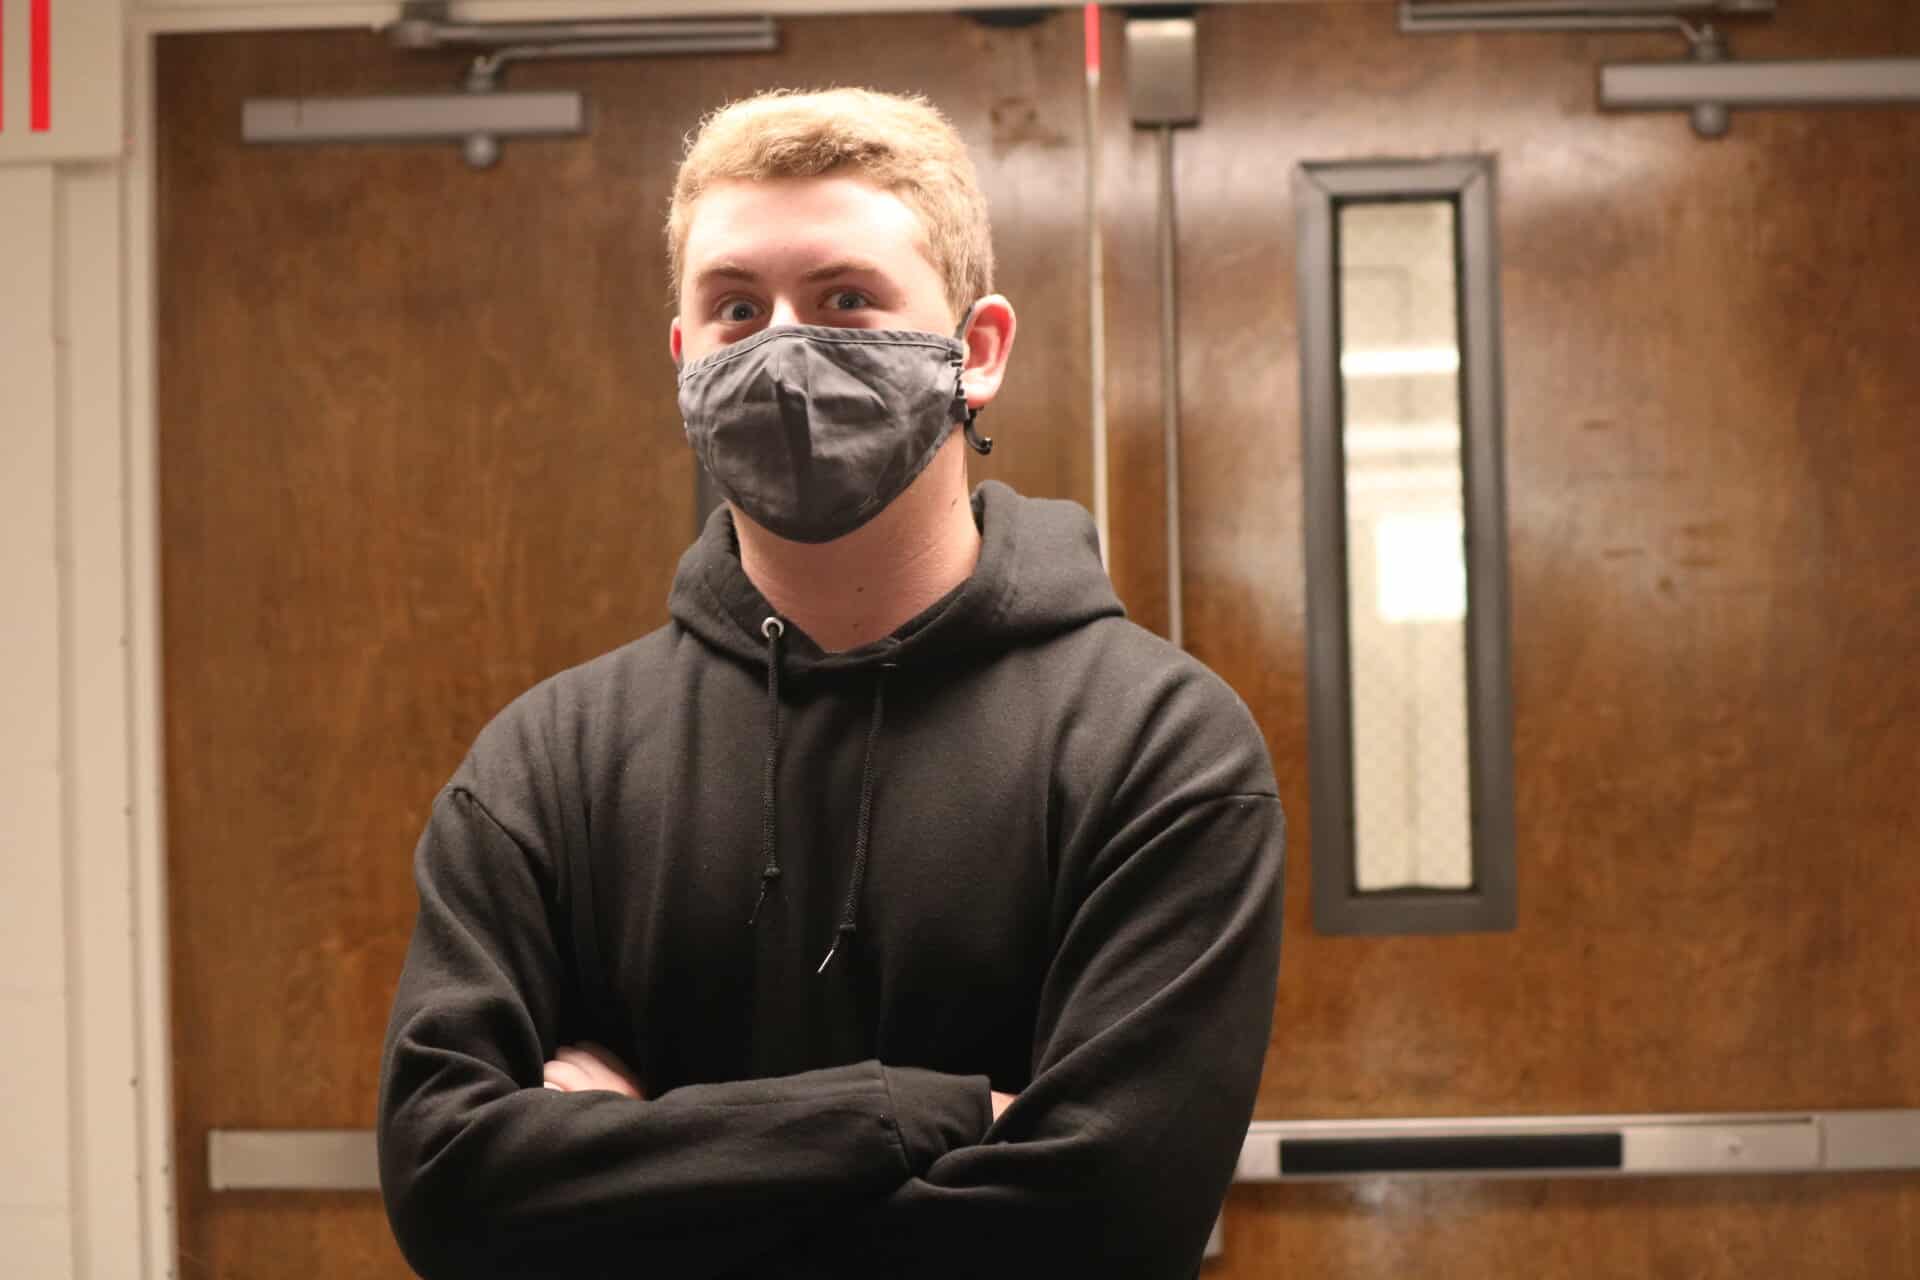 Garrick Hagen, freshman business administration major shares a silly face and sports a black hoodie after working an event for the media team.